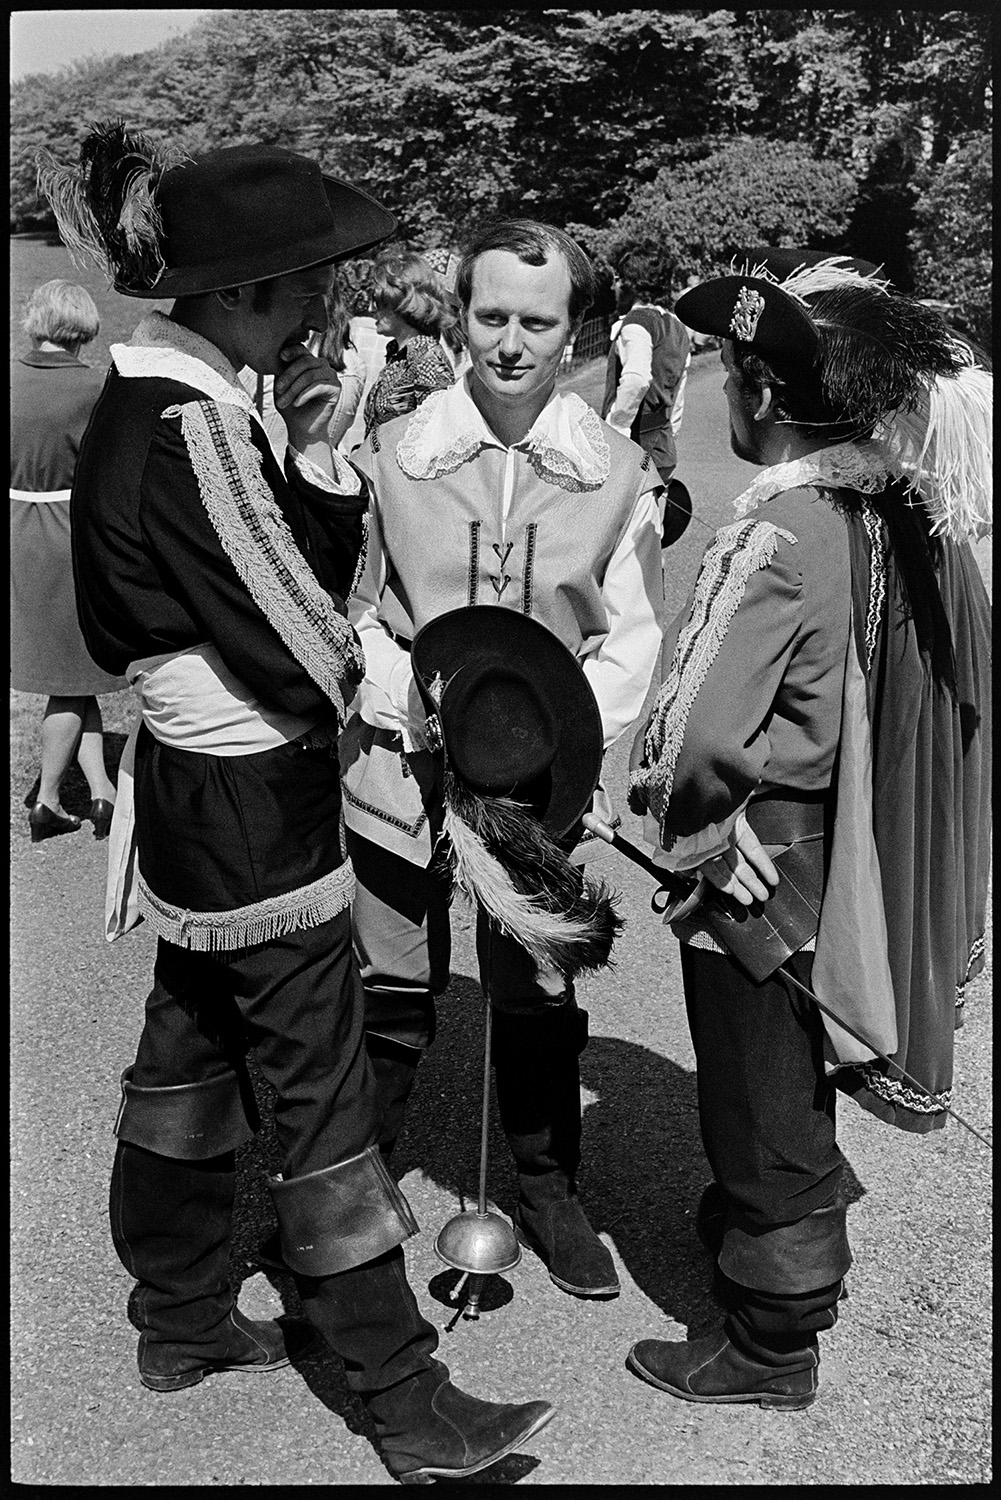 People preparing for Gymkhana. Cavaliers dressing as Wombles in aid of the handicapped. 
[Members of the Torrington Cavaliers in period dress at a fete at Cross House, Torrington to raise money for the Riding for the Disabled Association.]